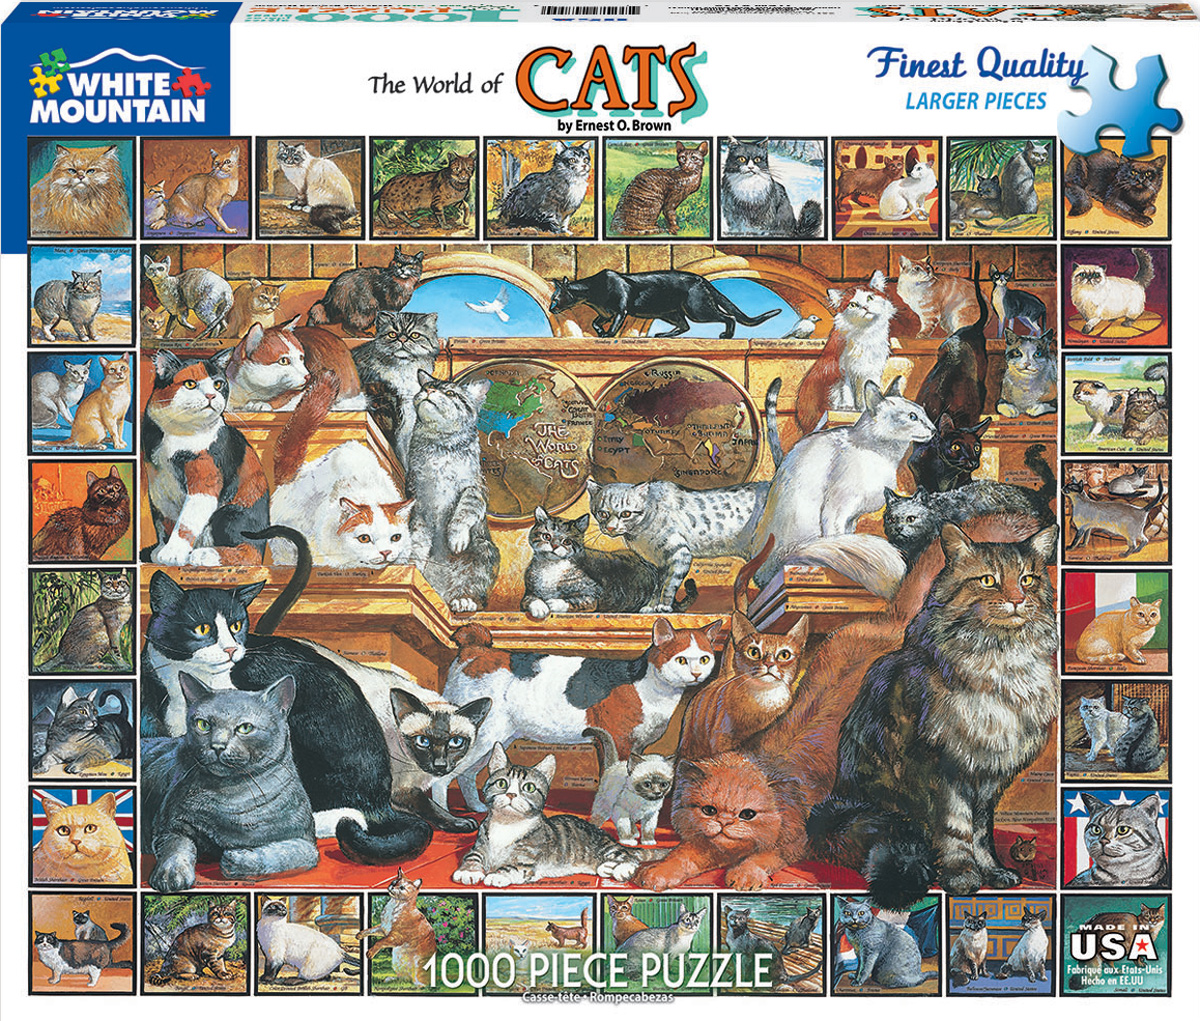 The World of Cats